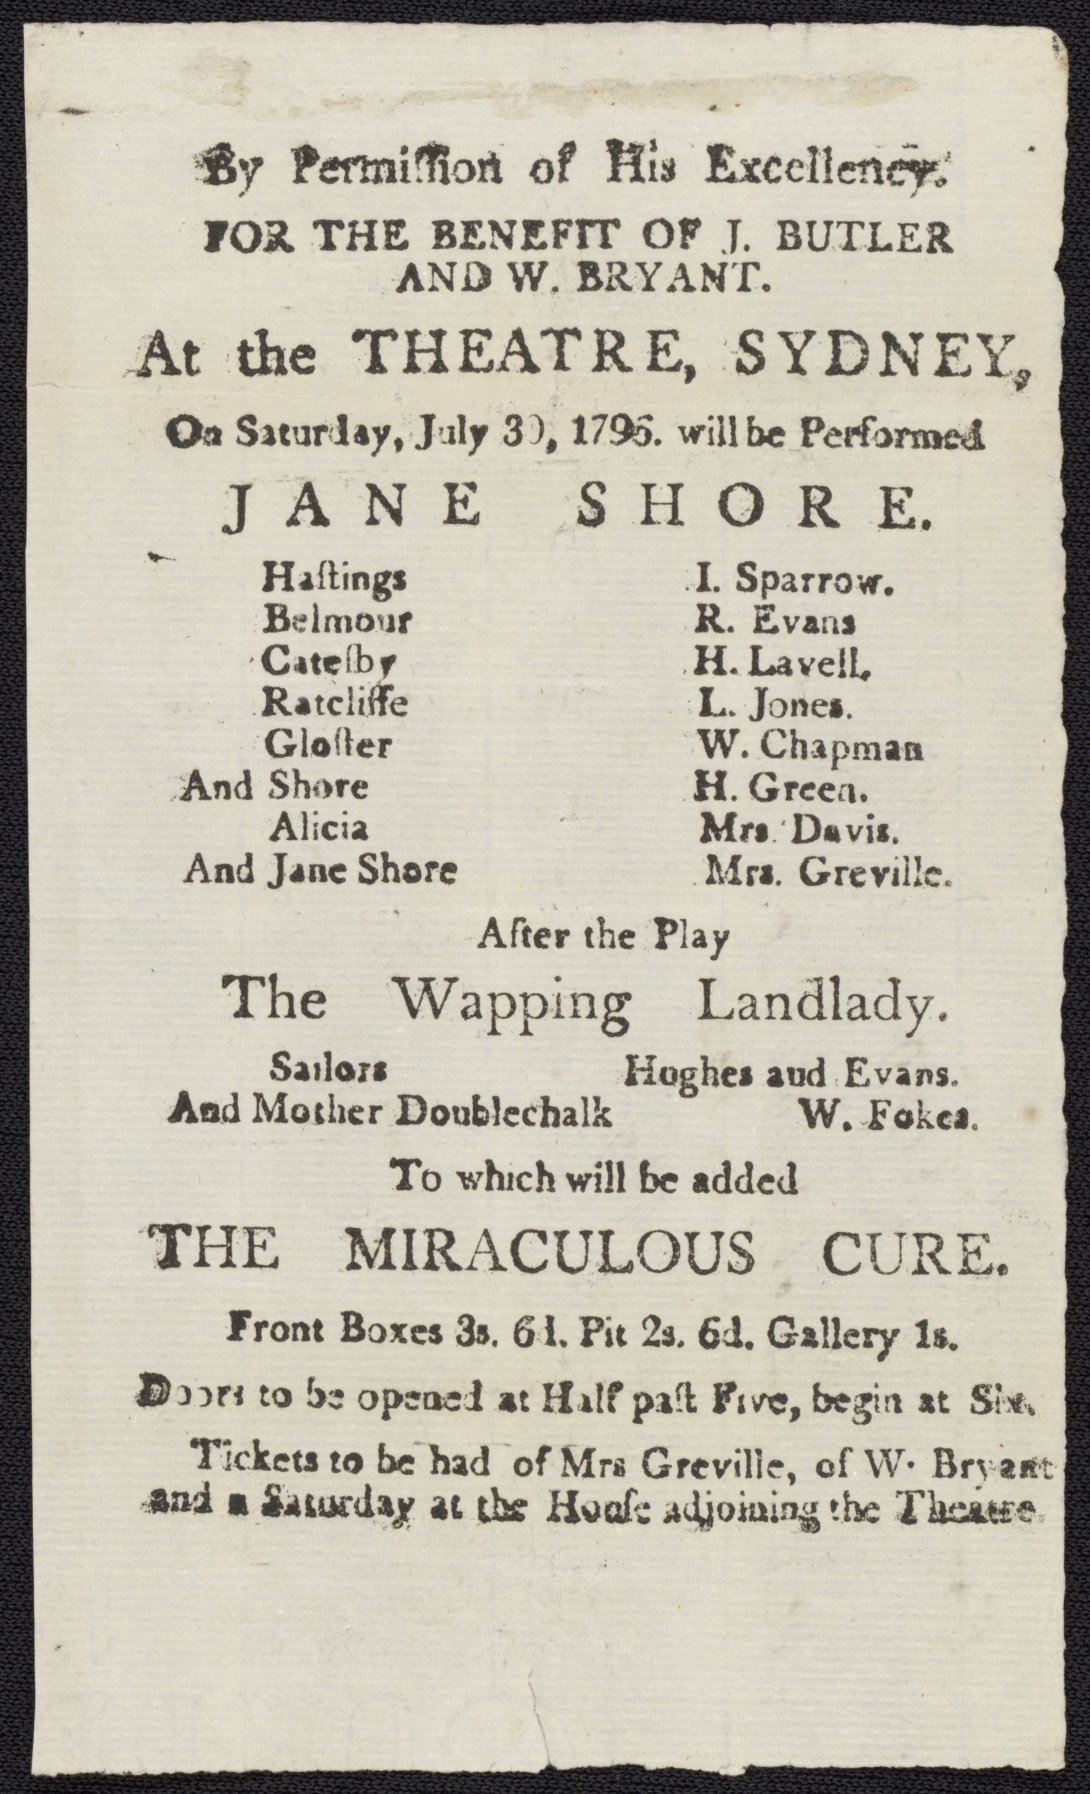 A printed playbill advertising a performance in 1796